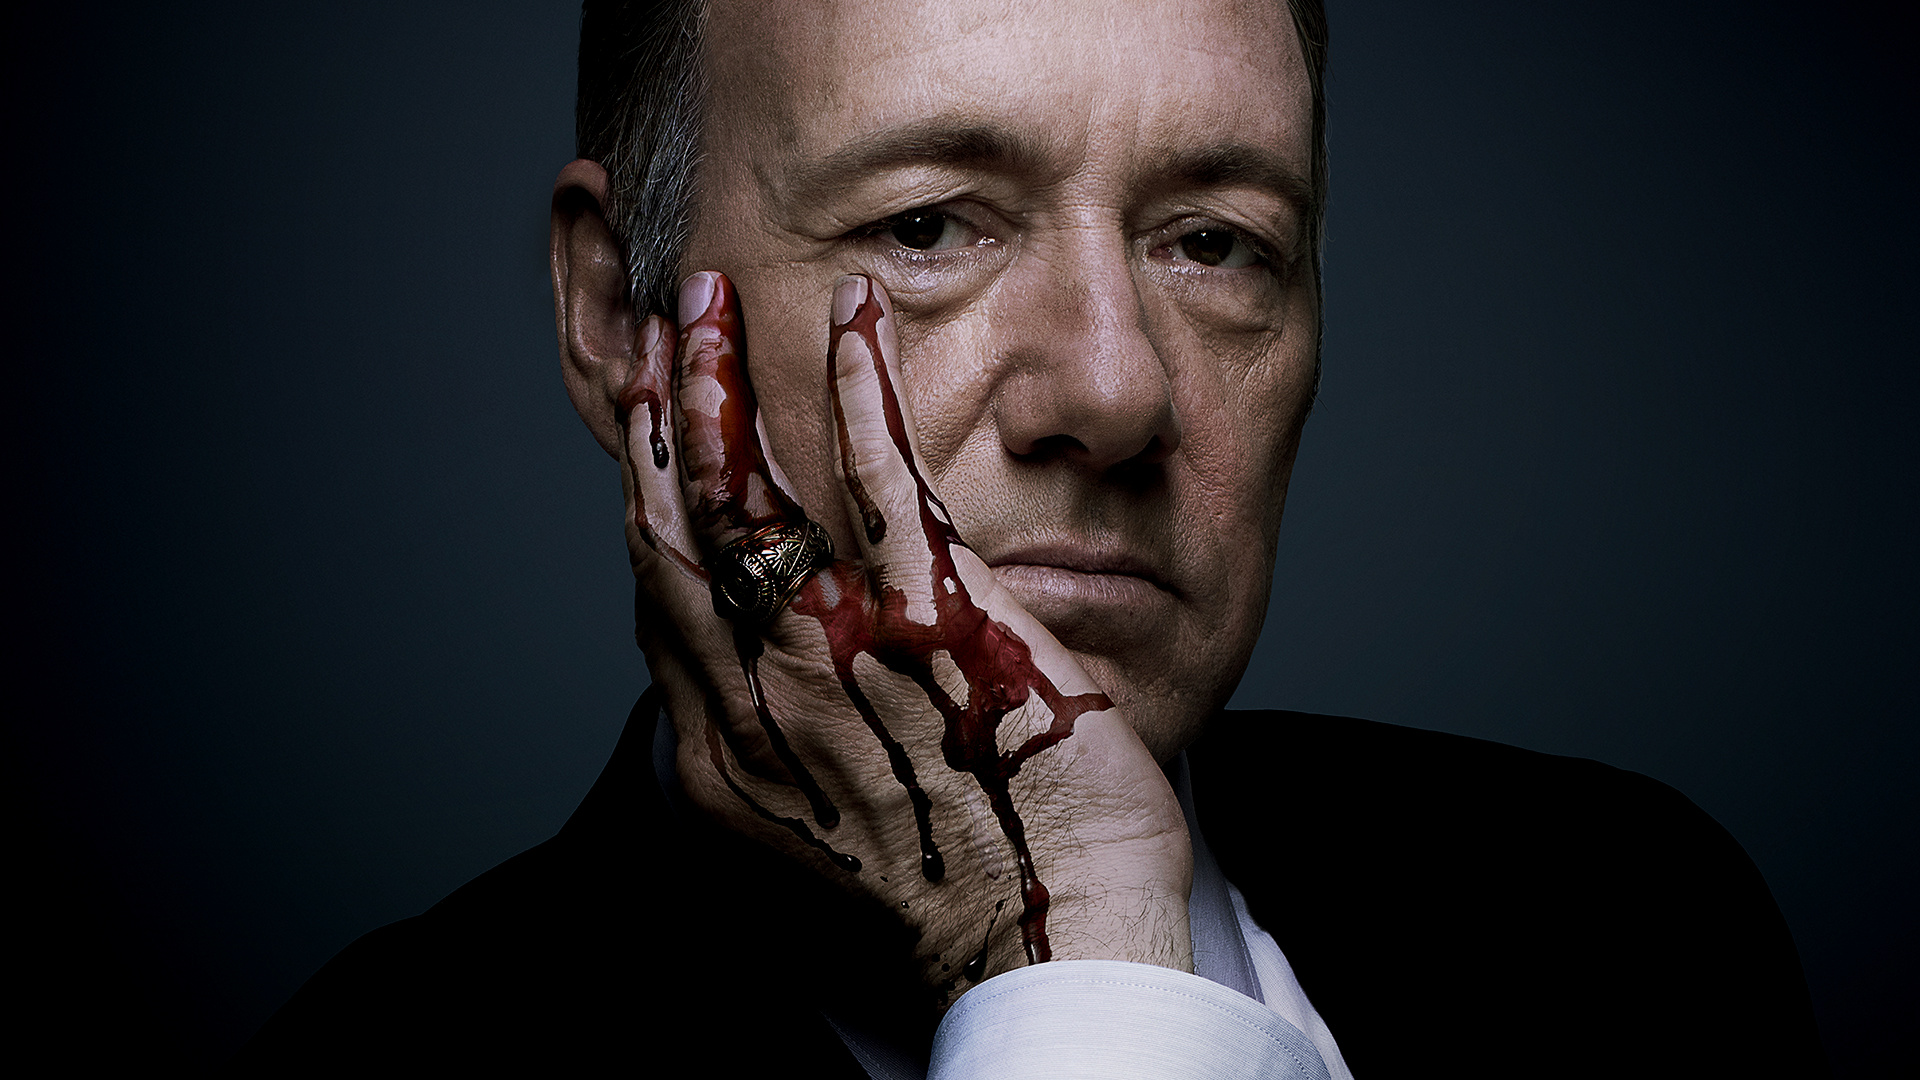 spacey-house-of-cards-season-3-in-t-72-days-but-hey-who-s-counting